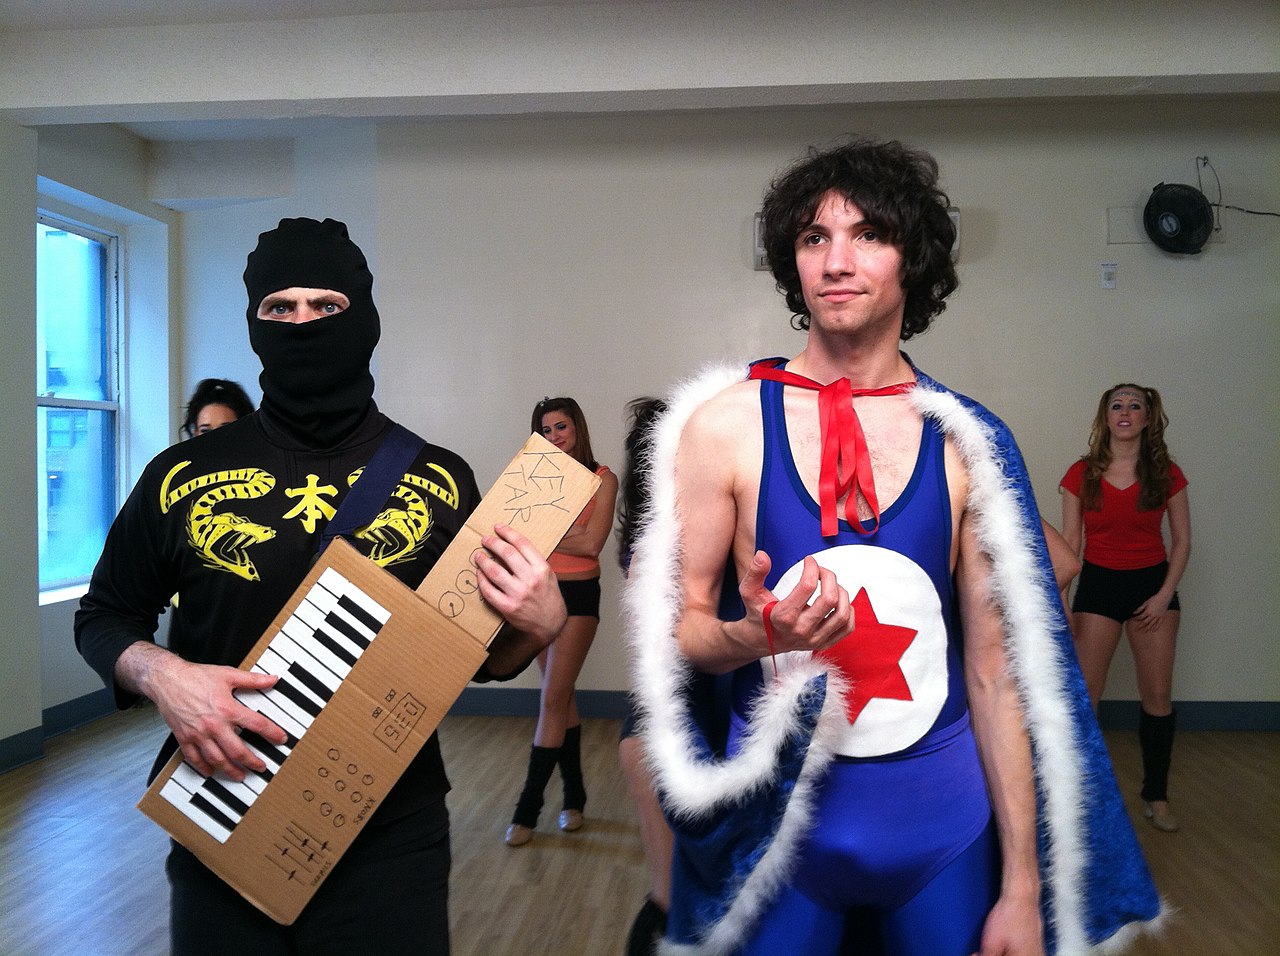 File:Ninja Sex Party on the set of Next To You.jpg - Wikimedia Commons